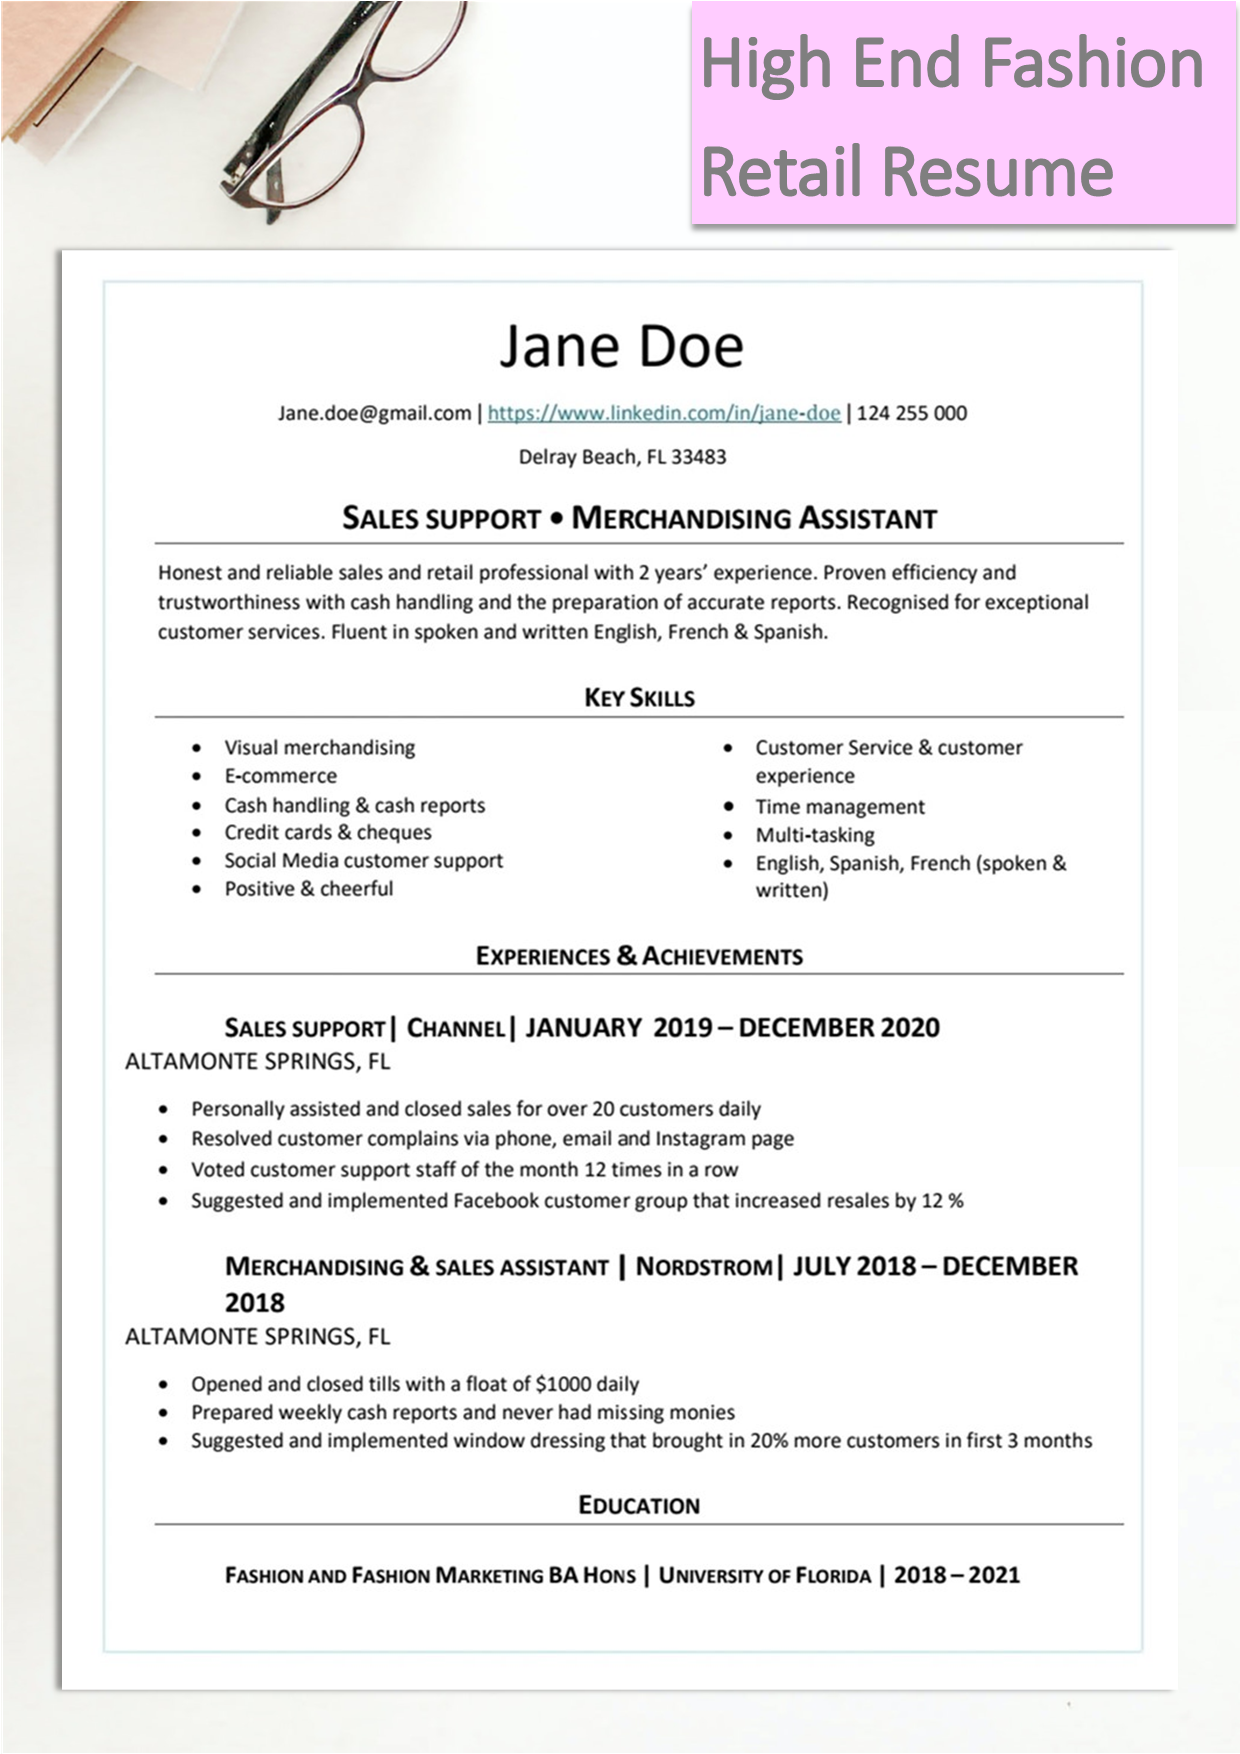 resume examples for retail